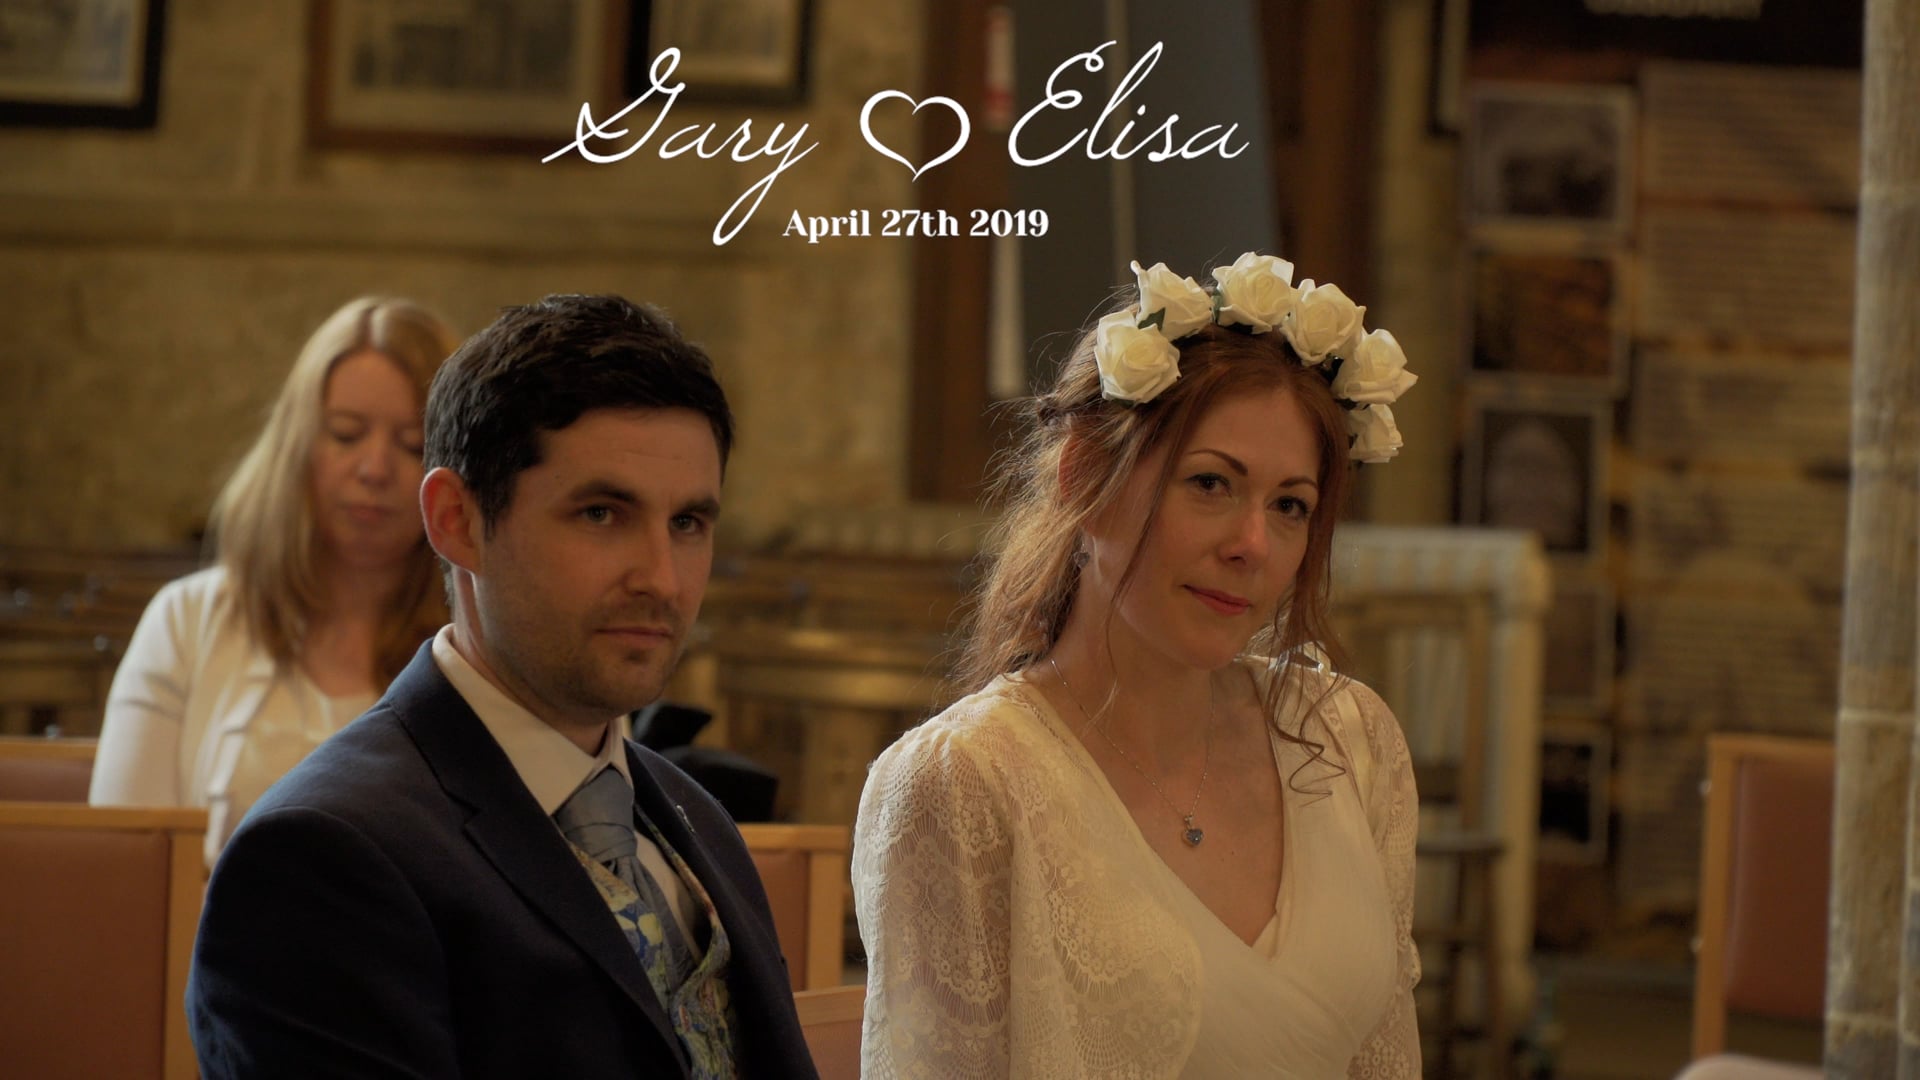 Gary & Elisa - The Blessing - 27th April 2019